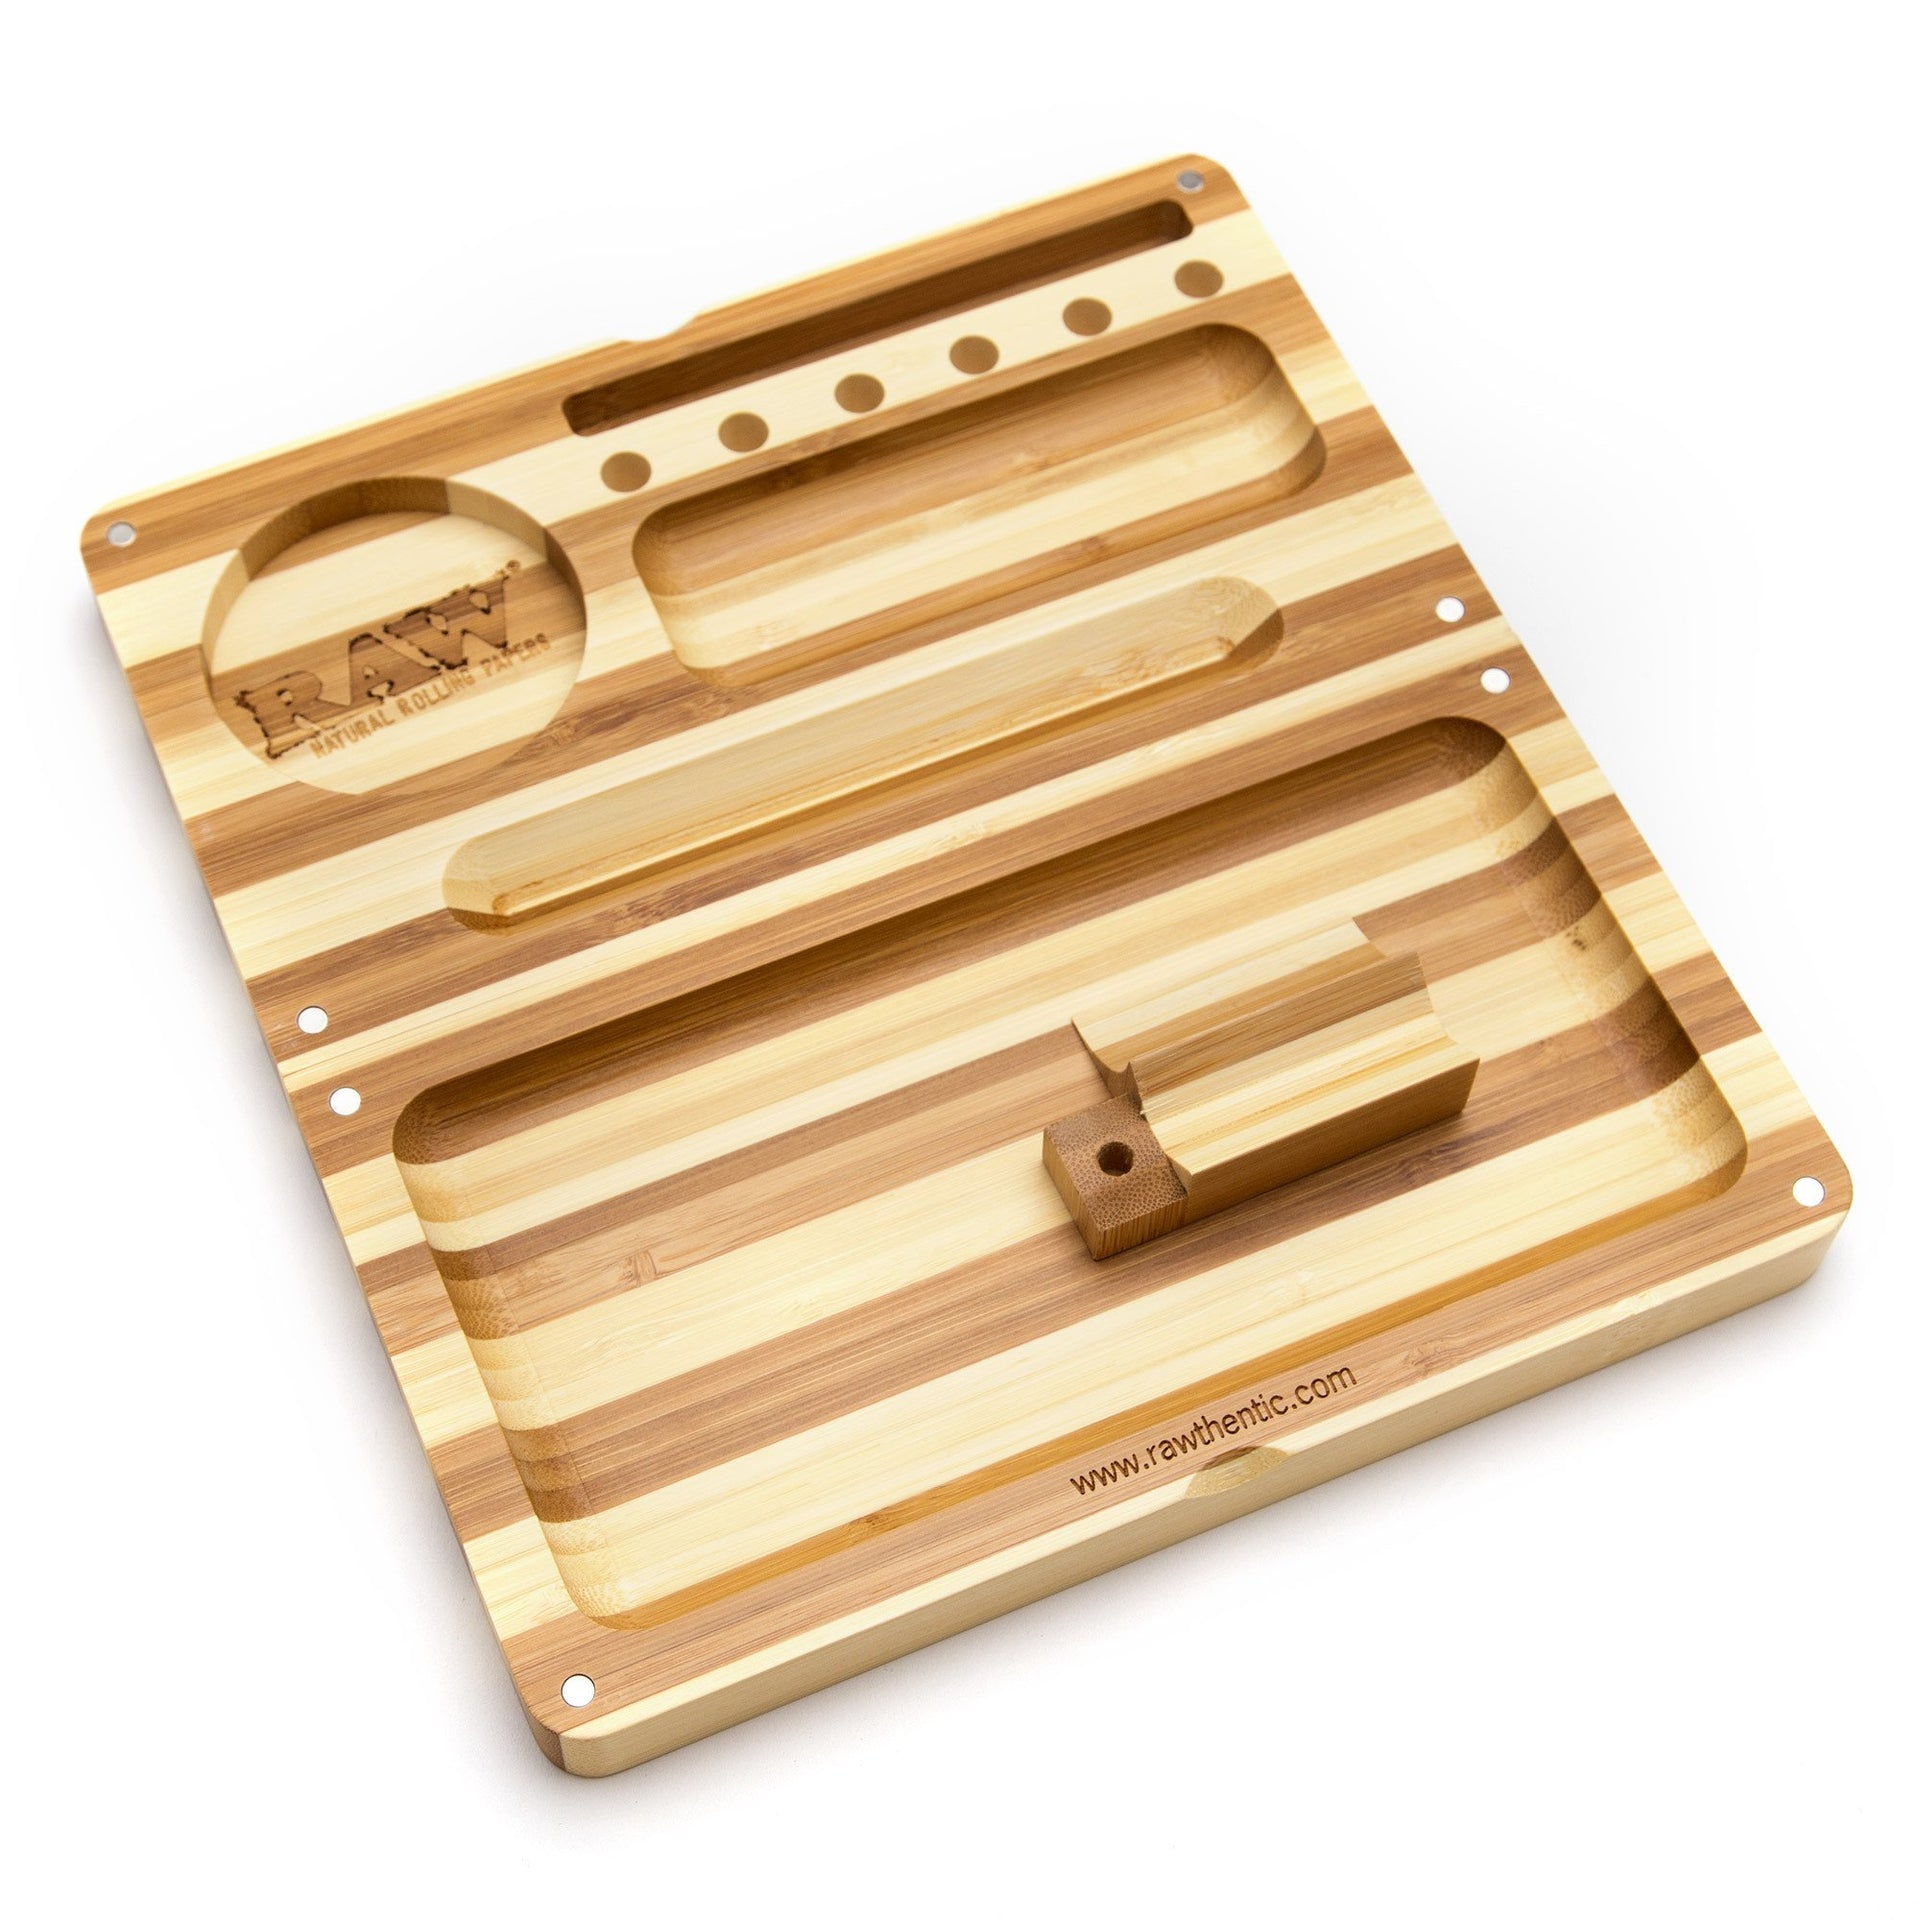 RAW Backflip Magnetic Bamboo Rolling Tray / $ 37.99 at 420 Science